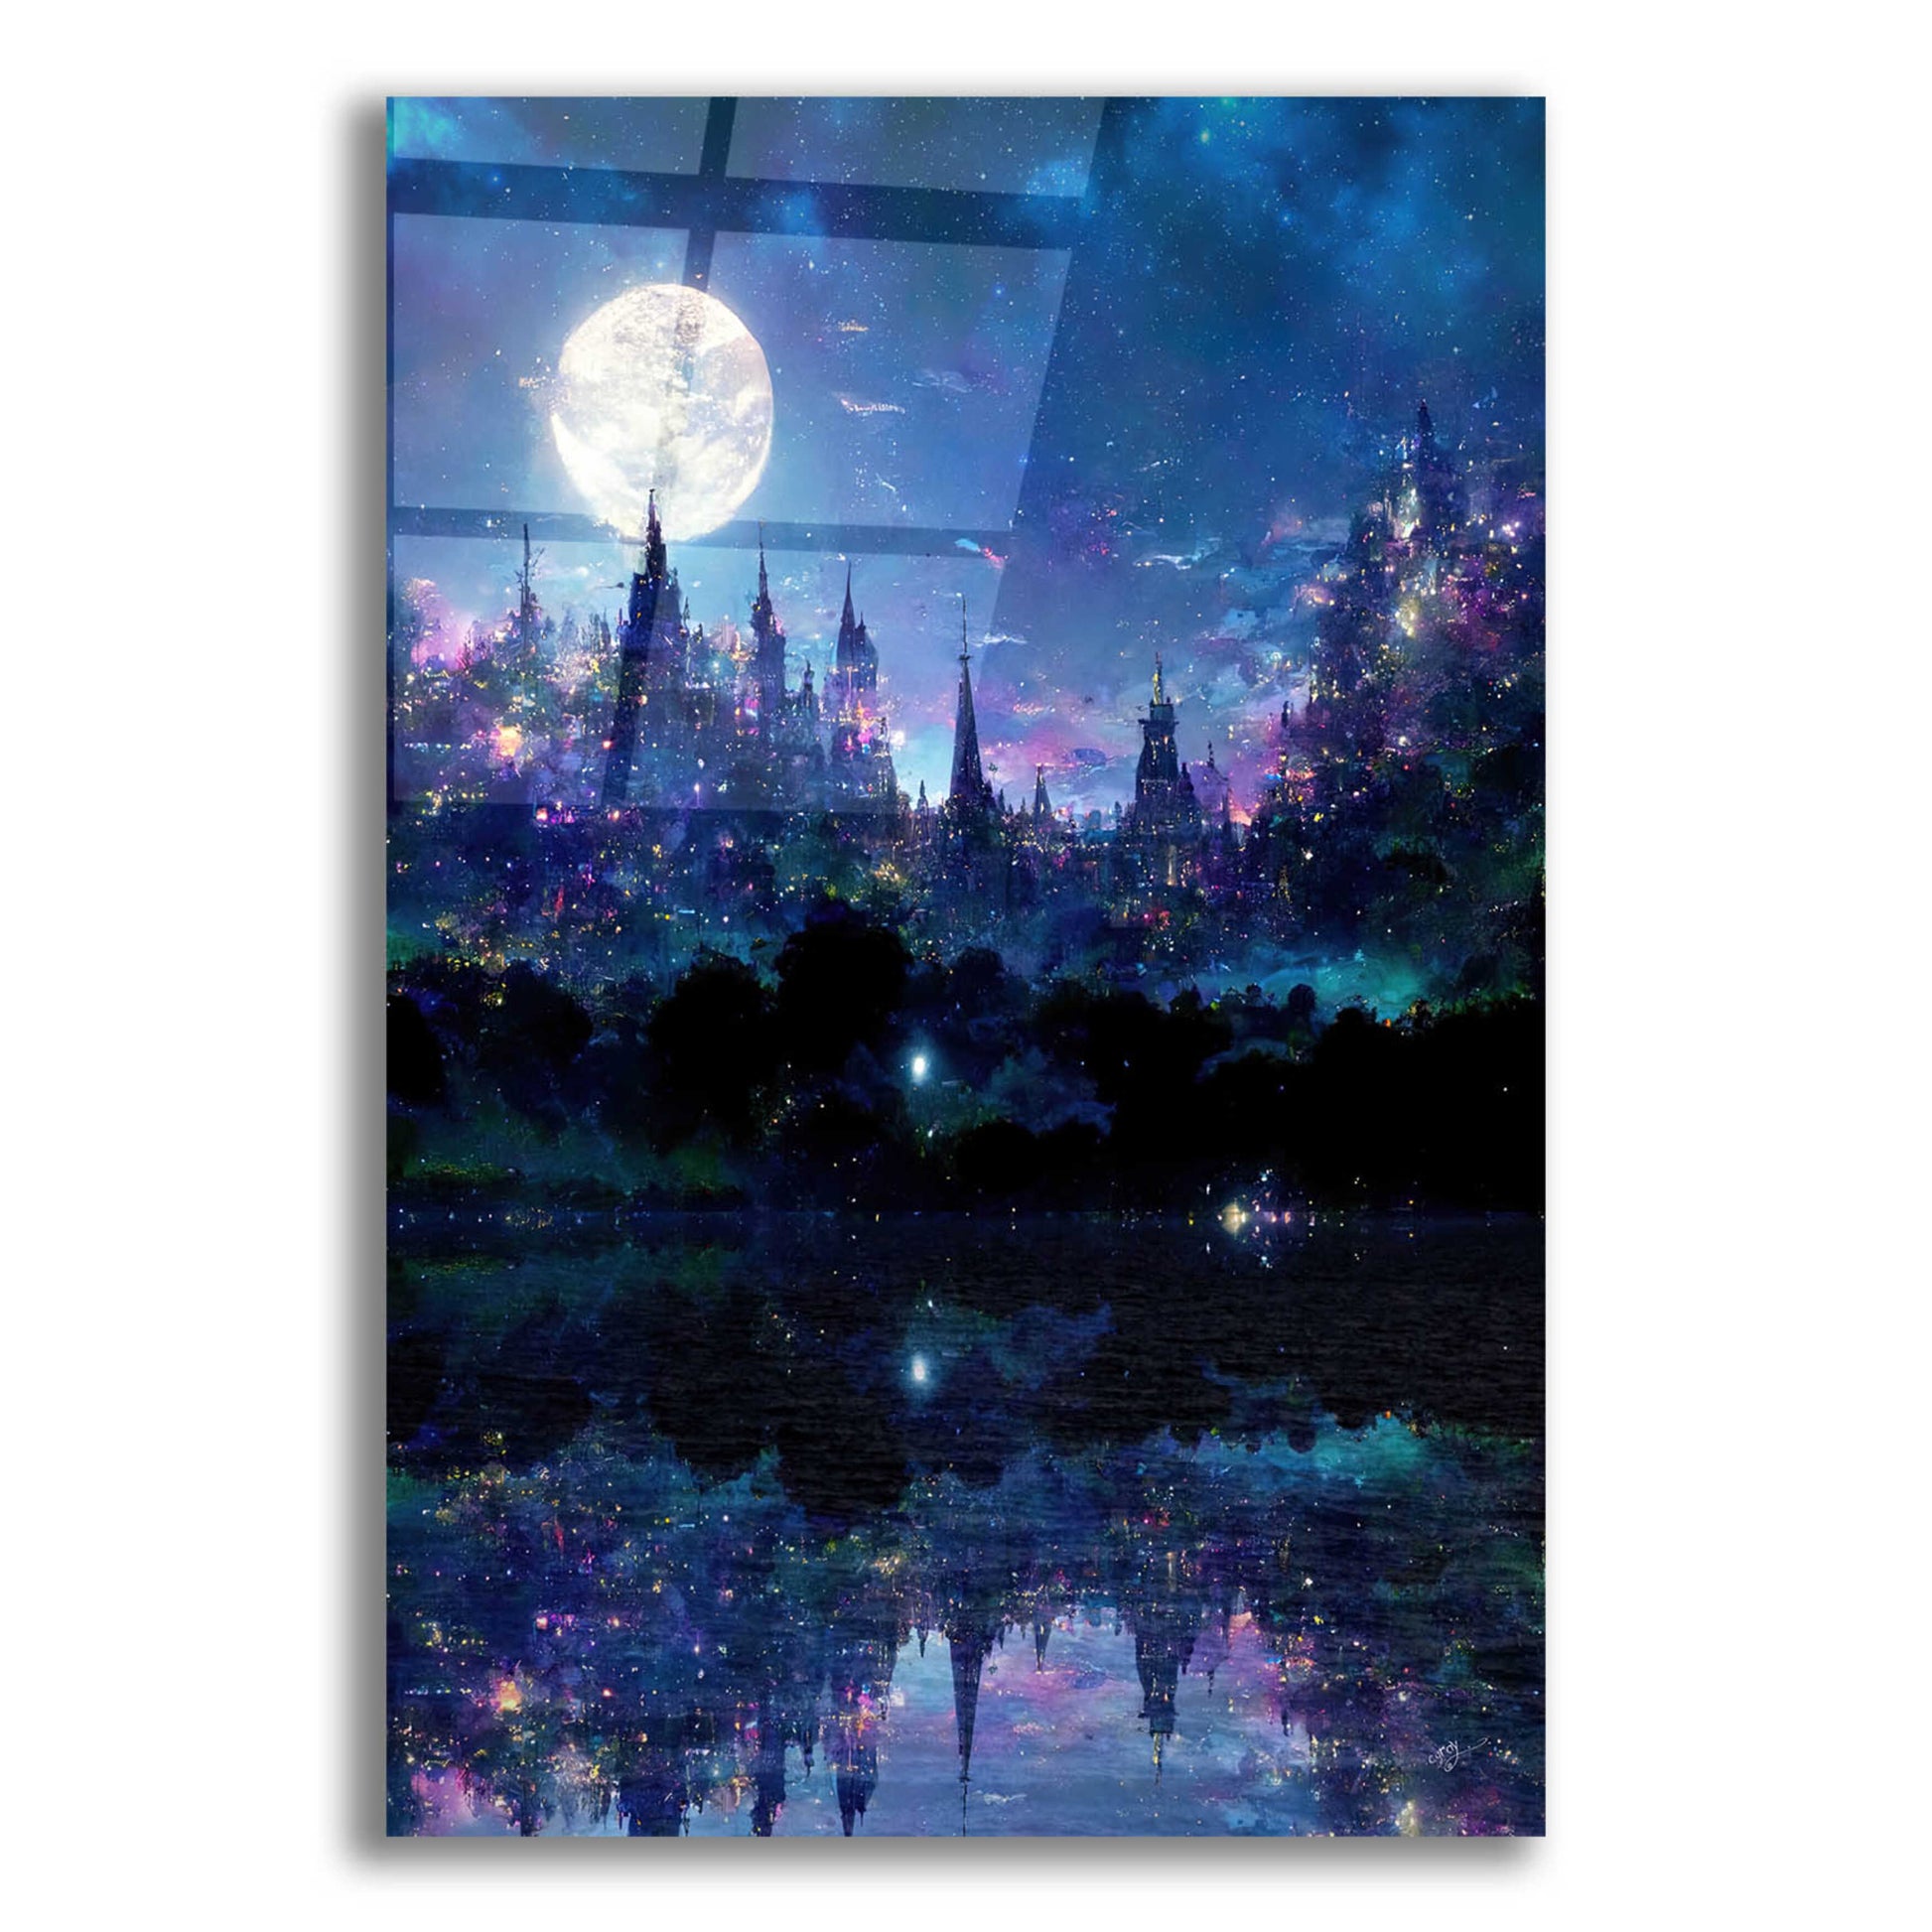 Epic Art 'Glowing In The Night' by Cameron Gray, Acrylic Glass Wall Art,12x16